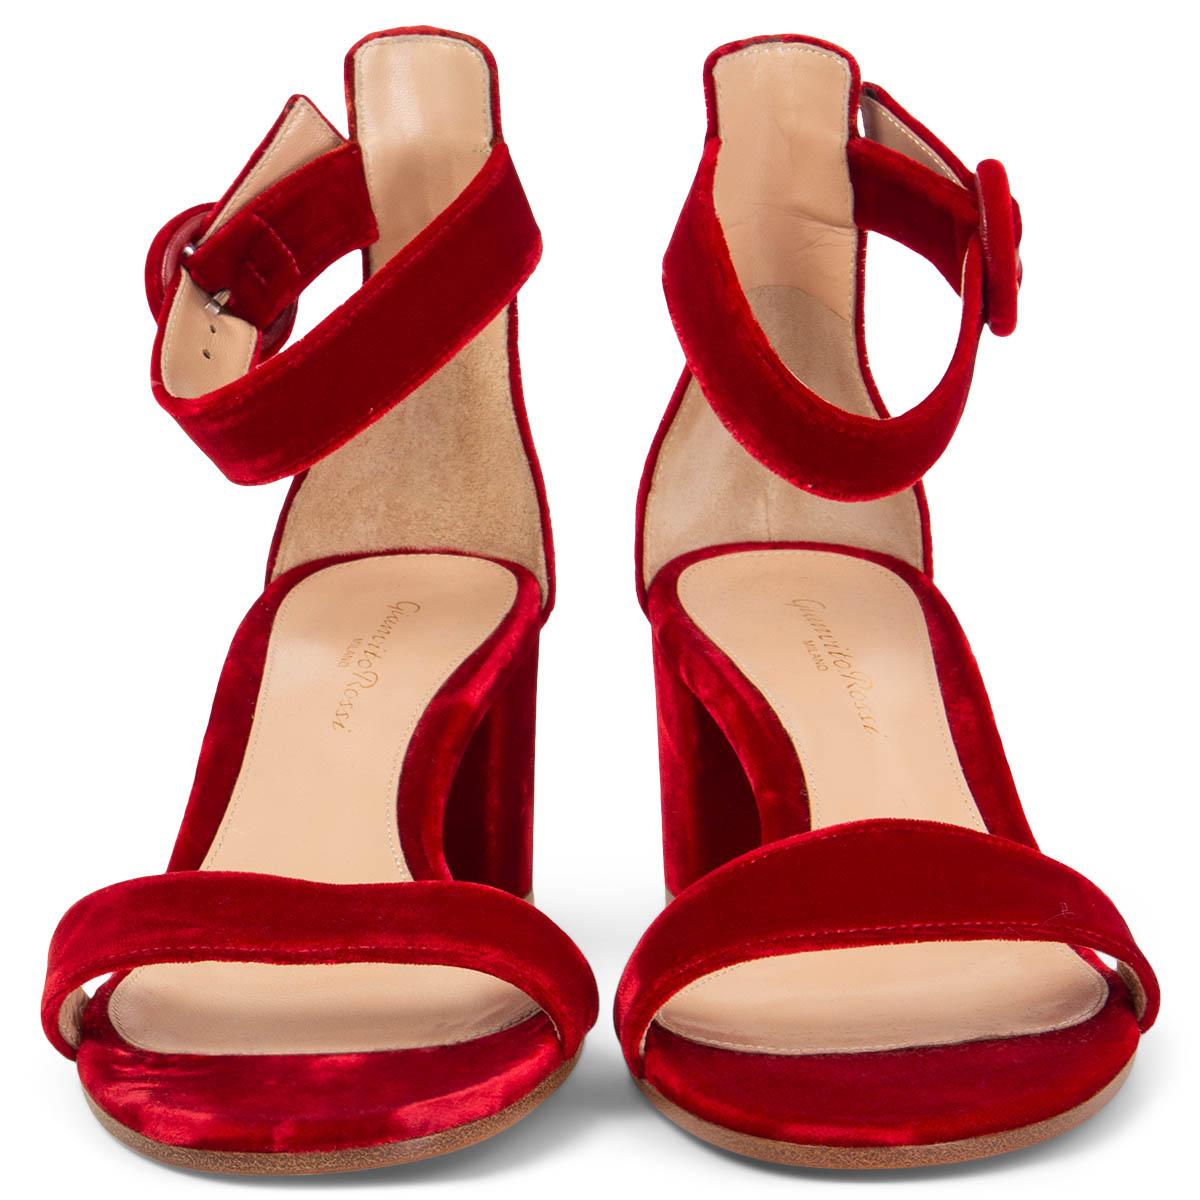 100% authentic Gianvito Rossi Versilia 60 sandals in red velvet with a single band across the toe and an ankle strap. Brand new. 

Measurements
Imprinted Size	38
Shoe Size	38
Inside Sole	25cm (9.8in)
Width	7.5cm (2.9in)
Heel	6cm (2.3in)

All our